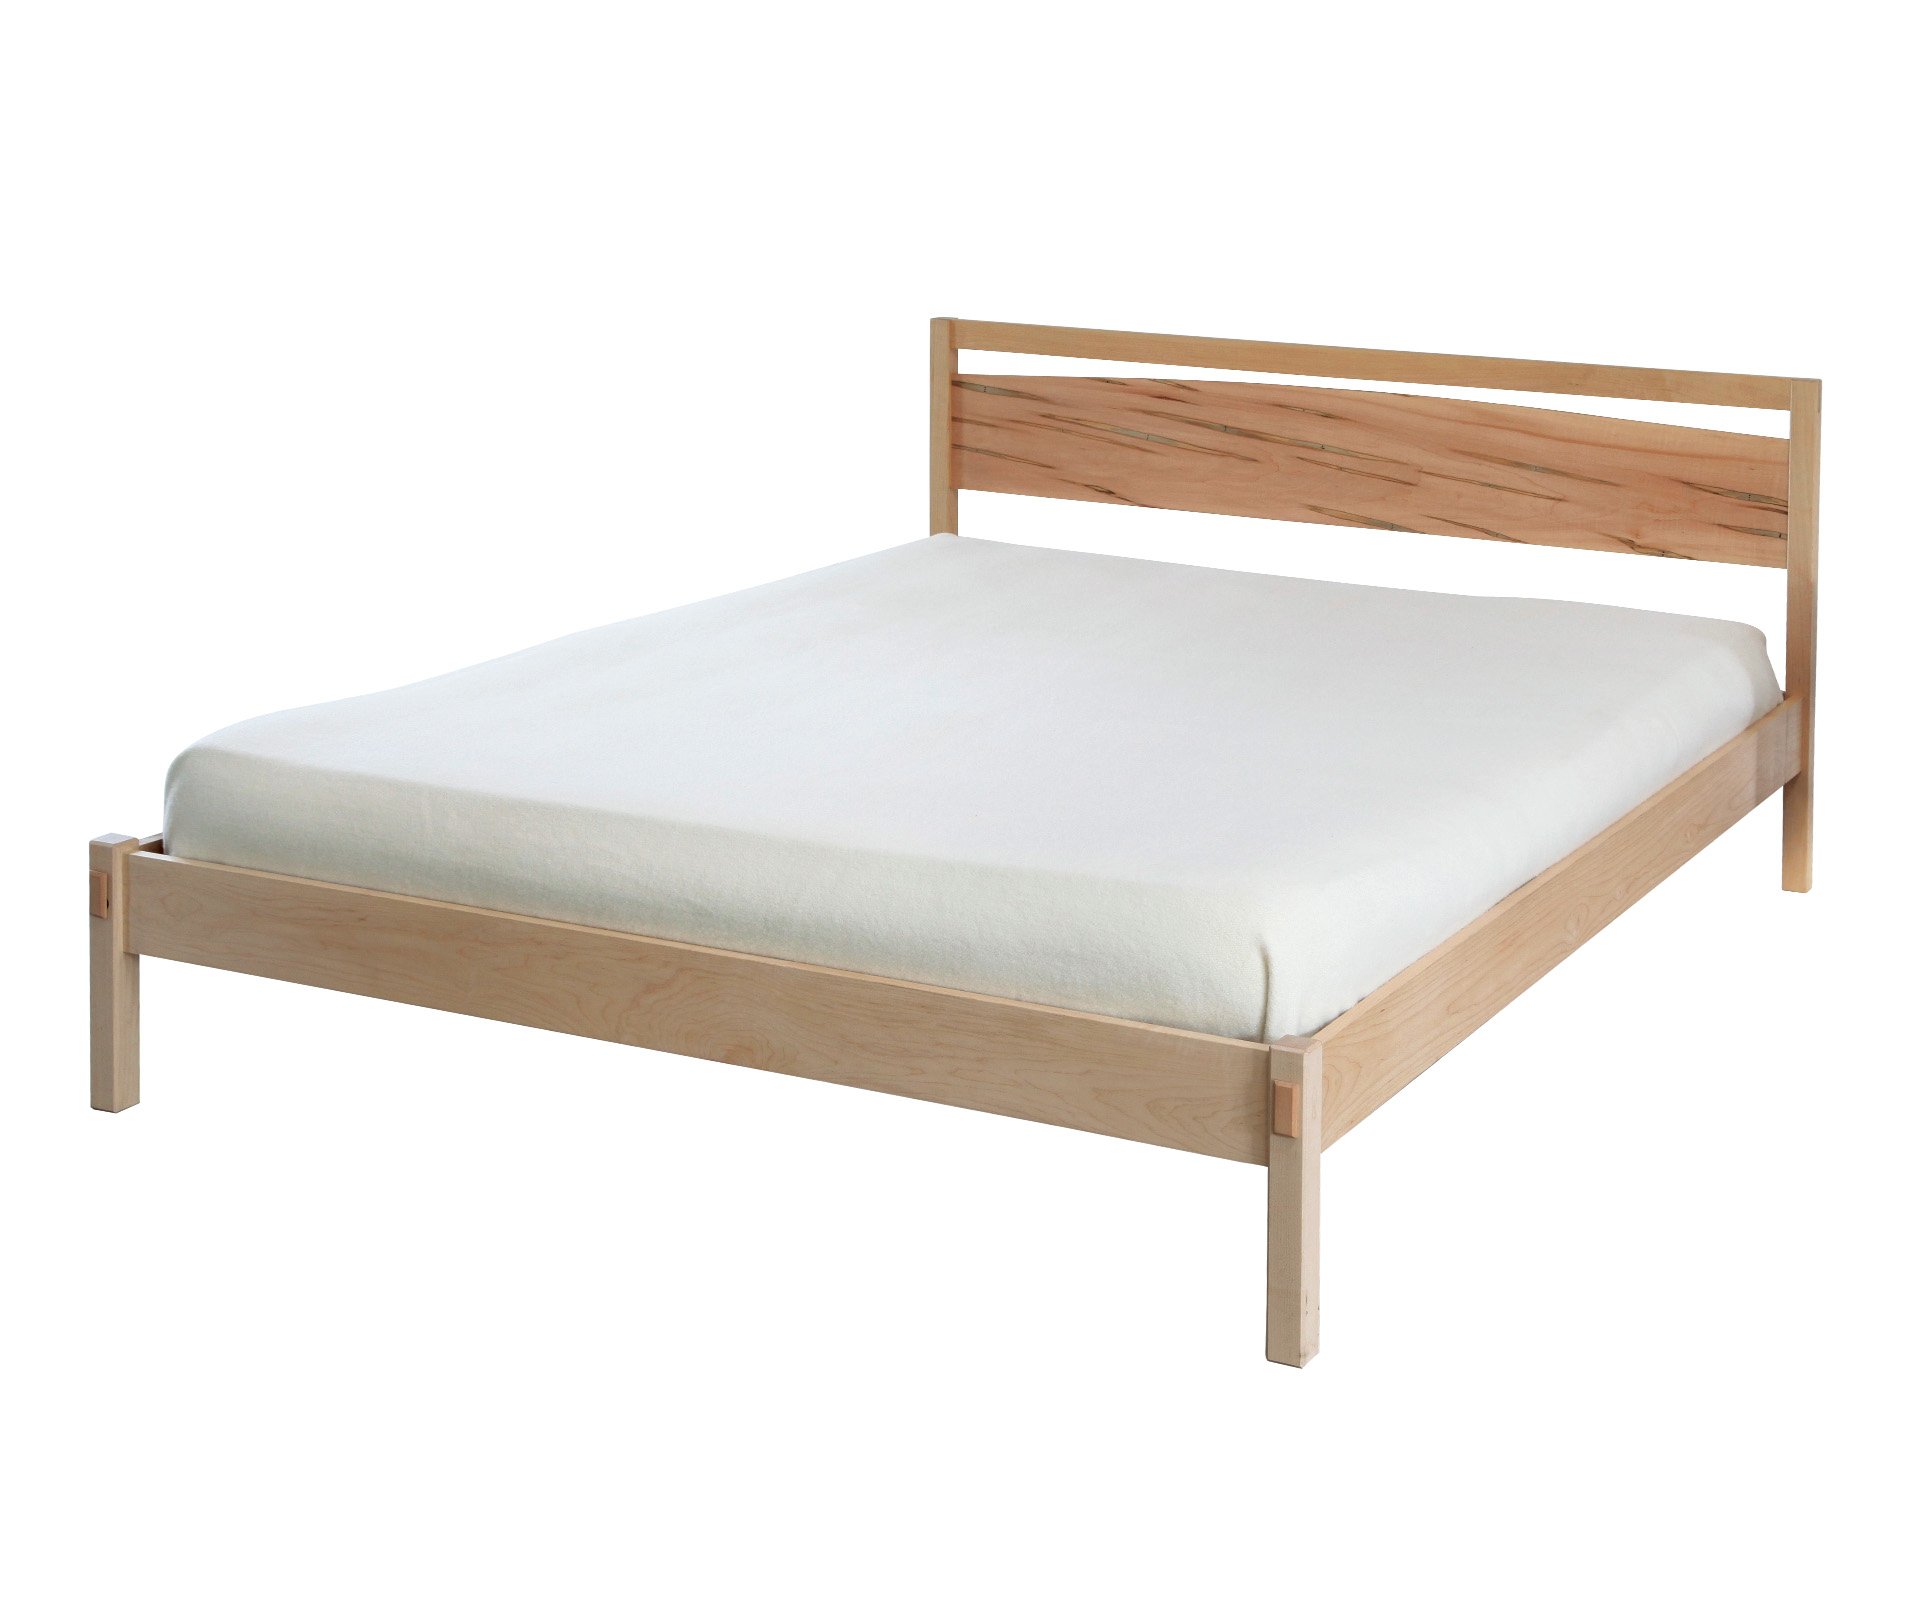 The Howland Bed